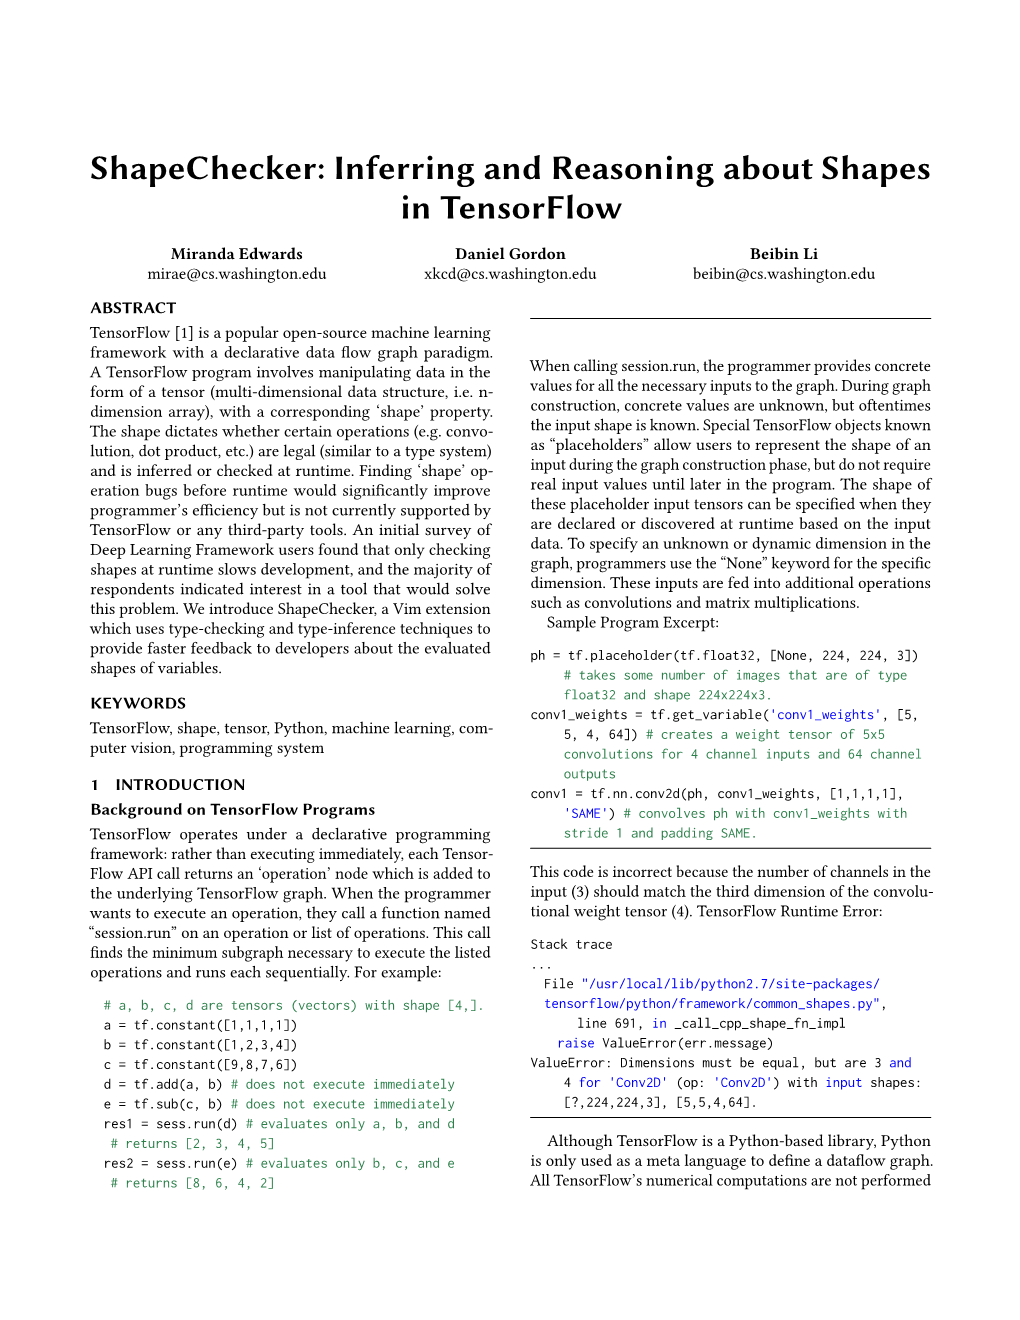 Shapechecker: Inferring and Reasoning About Shapes in Tensorflow